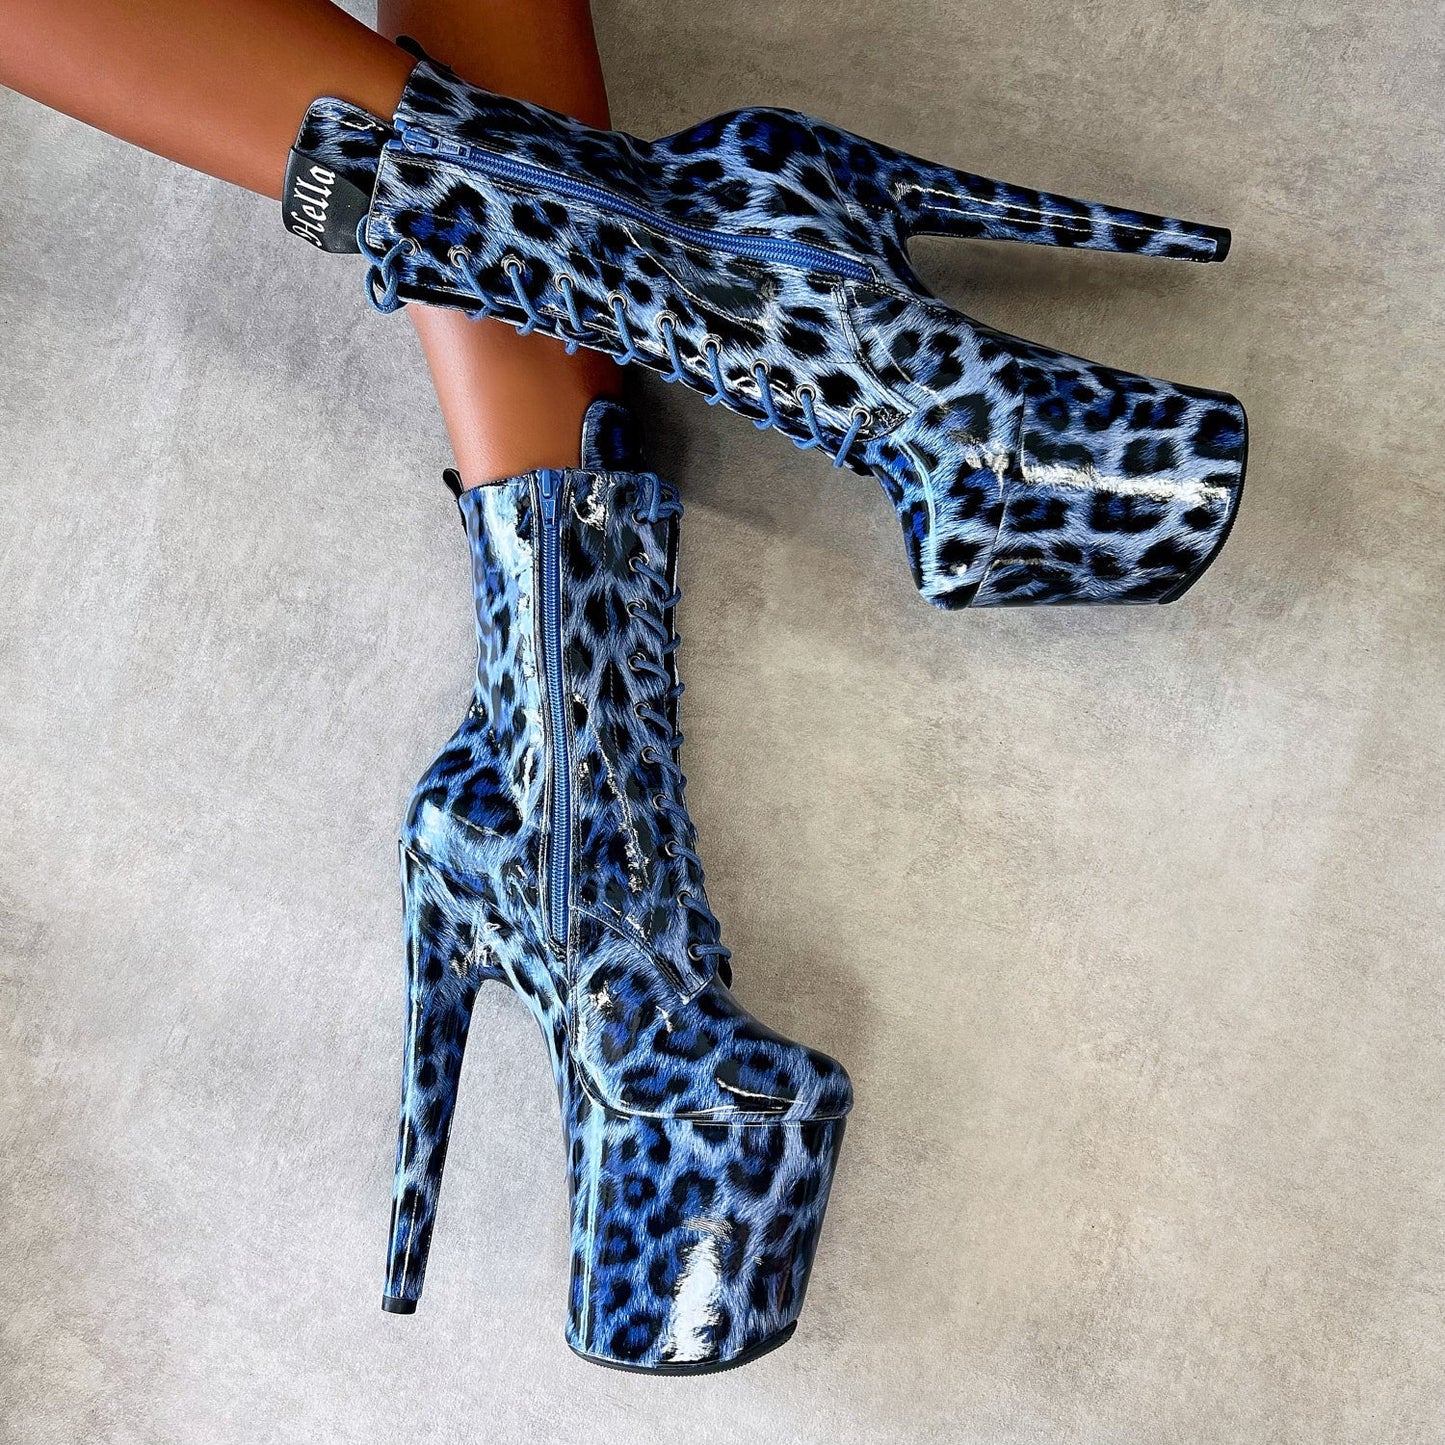 Blue Leopard Boot - 8 INCH + SP